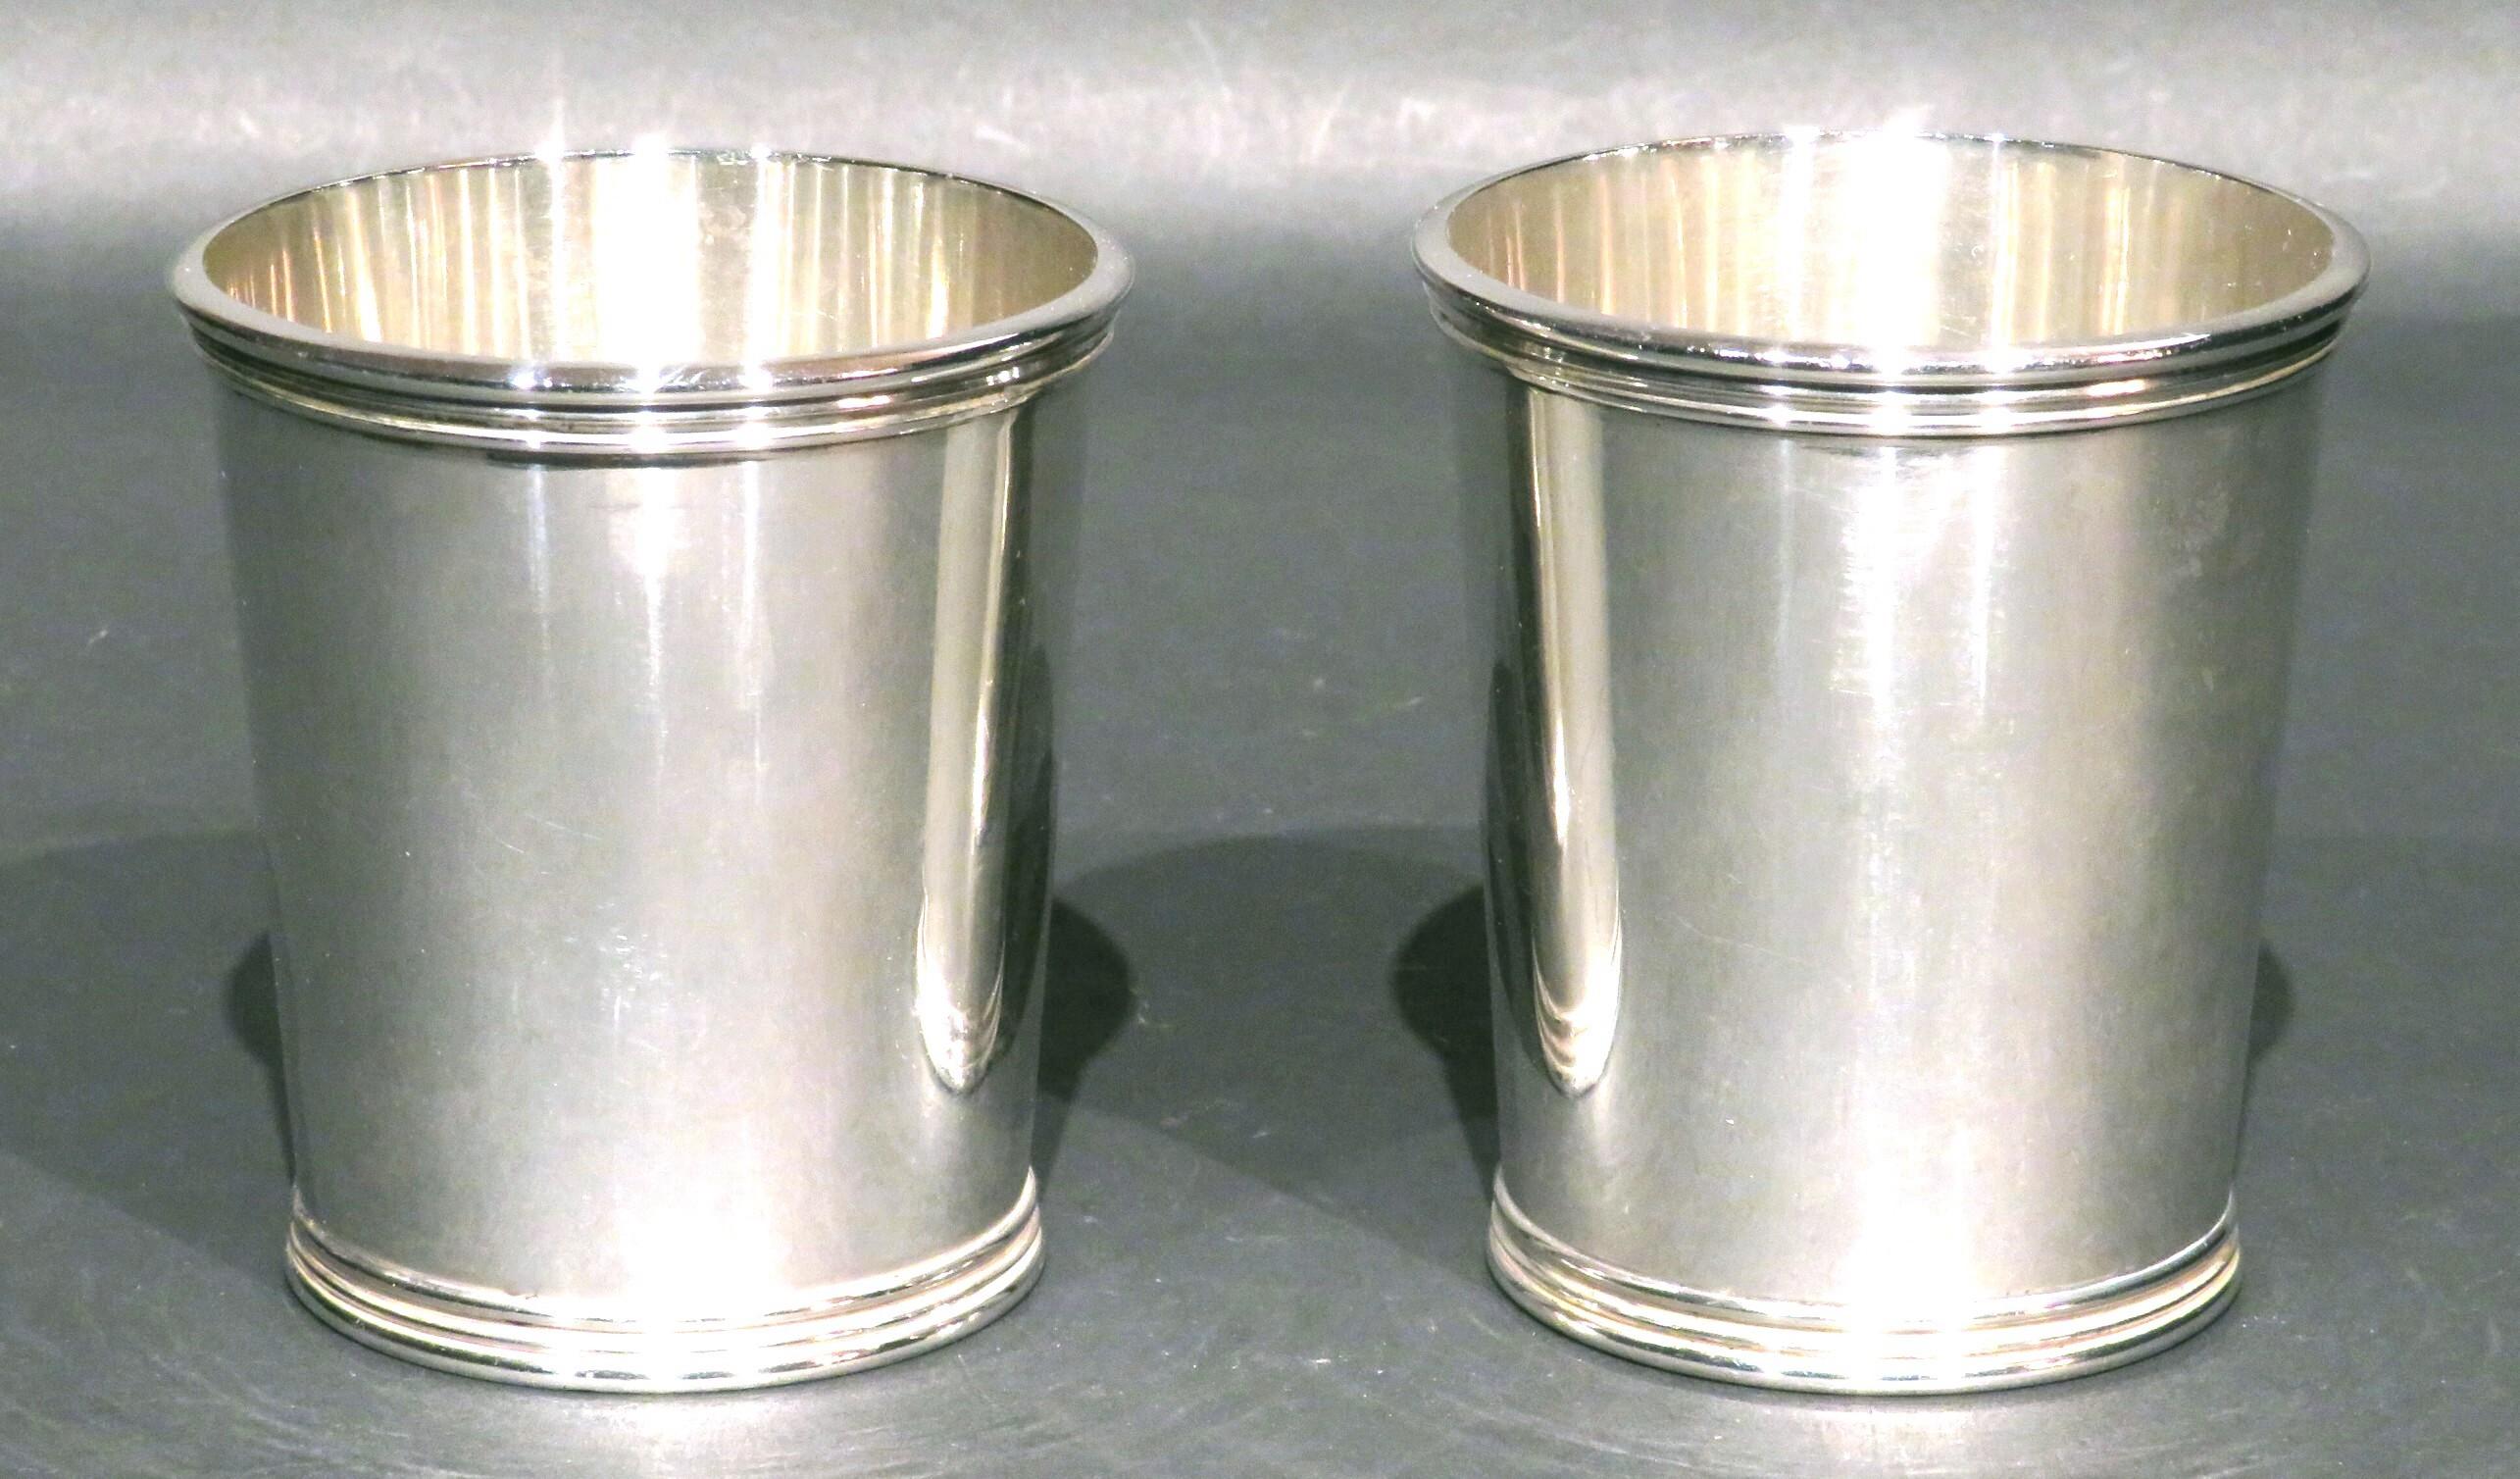 A very good and heavy pair of sterling silver mint julep cups, their rims & bases decorated with reeded detail, their interiors showing traces of a faint gilt wash, their undersides stamped STERLING and bearing model number 895 together with makers